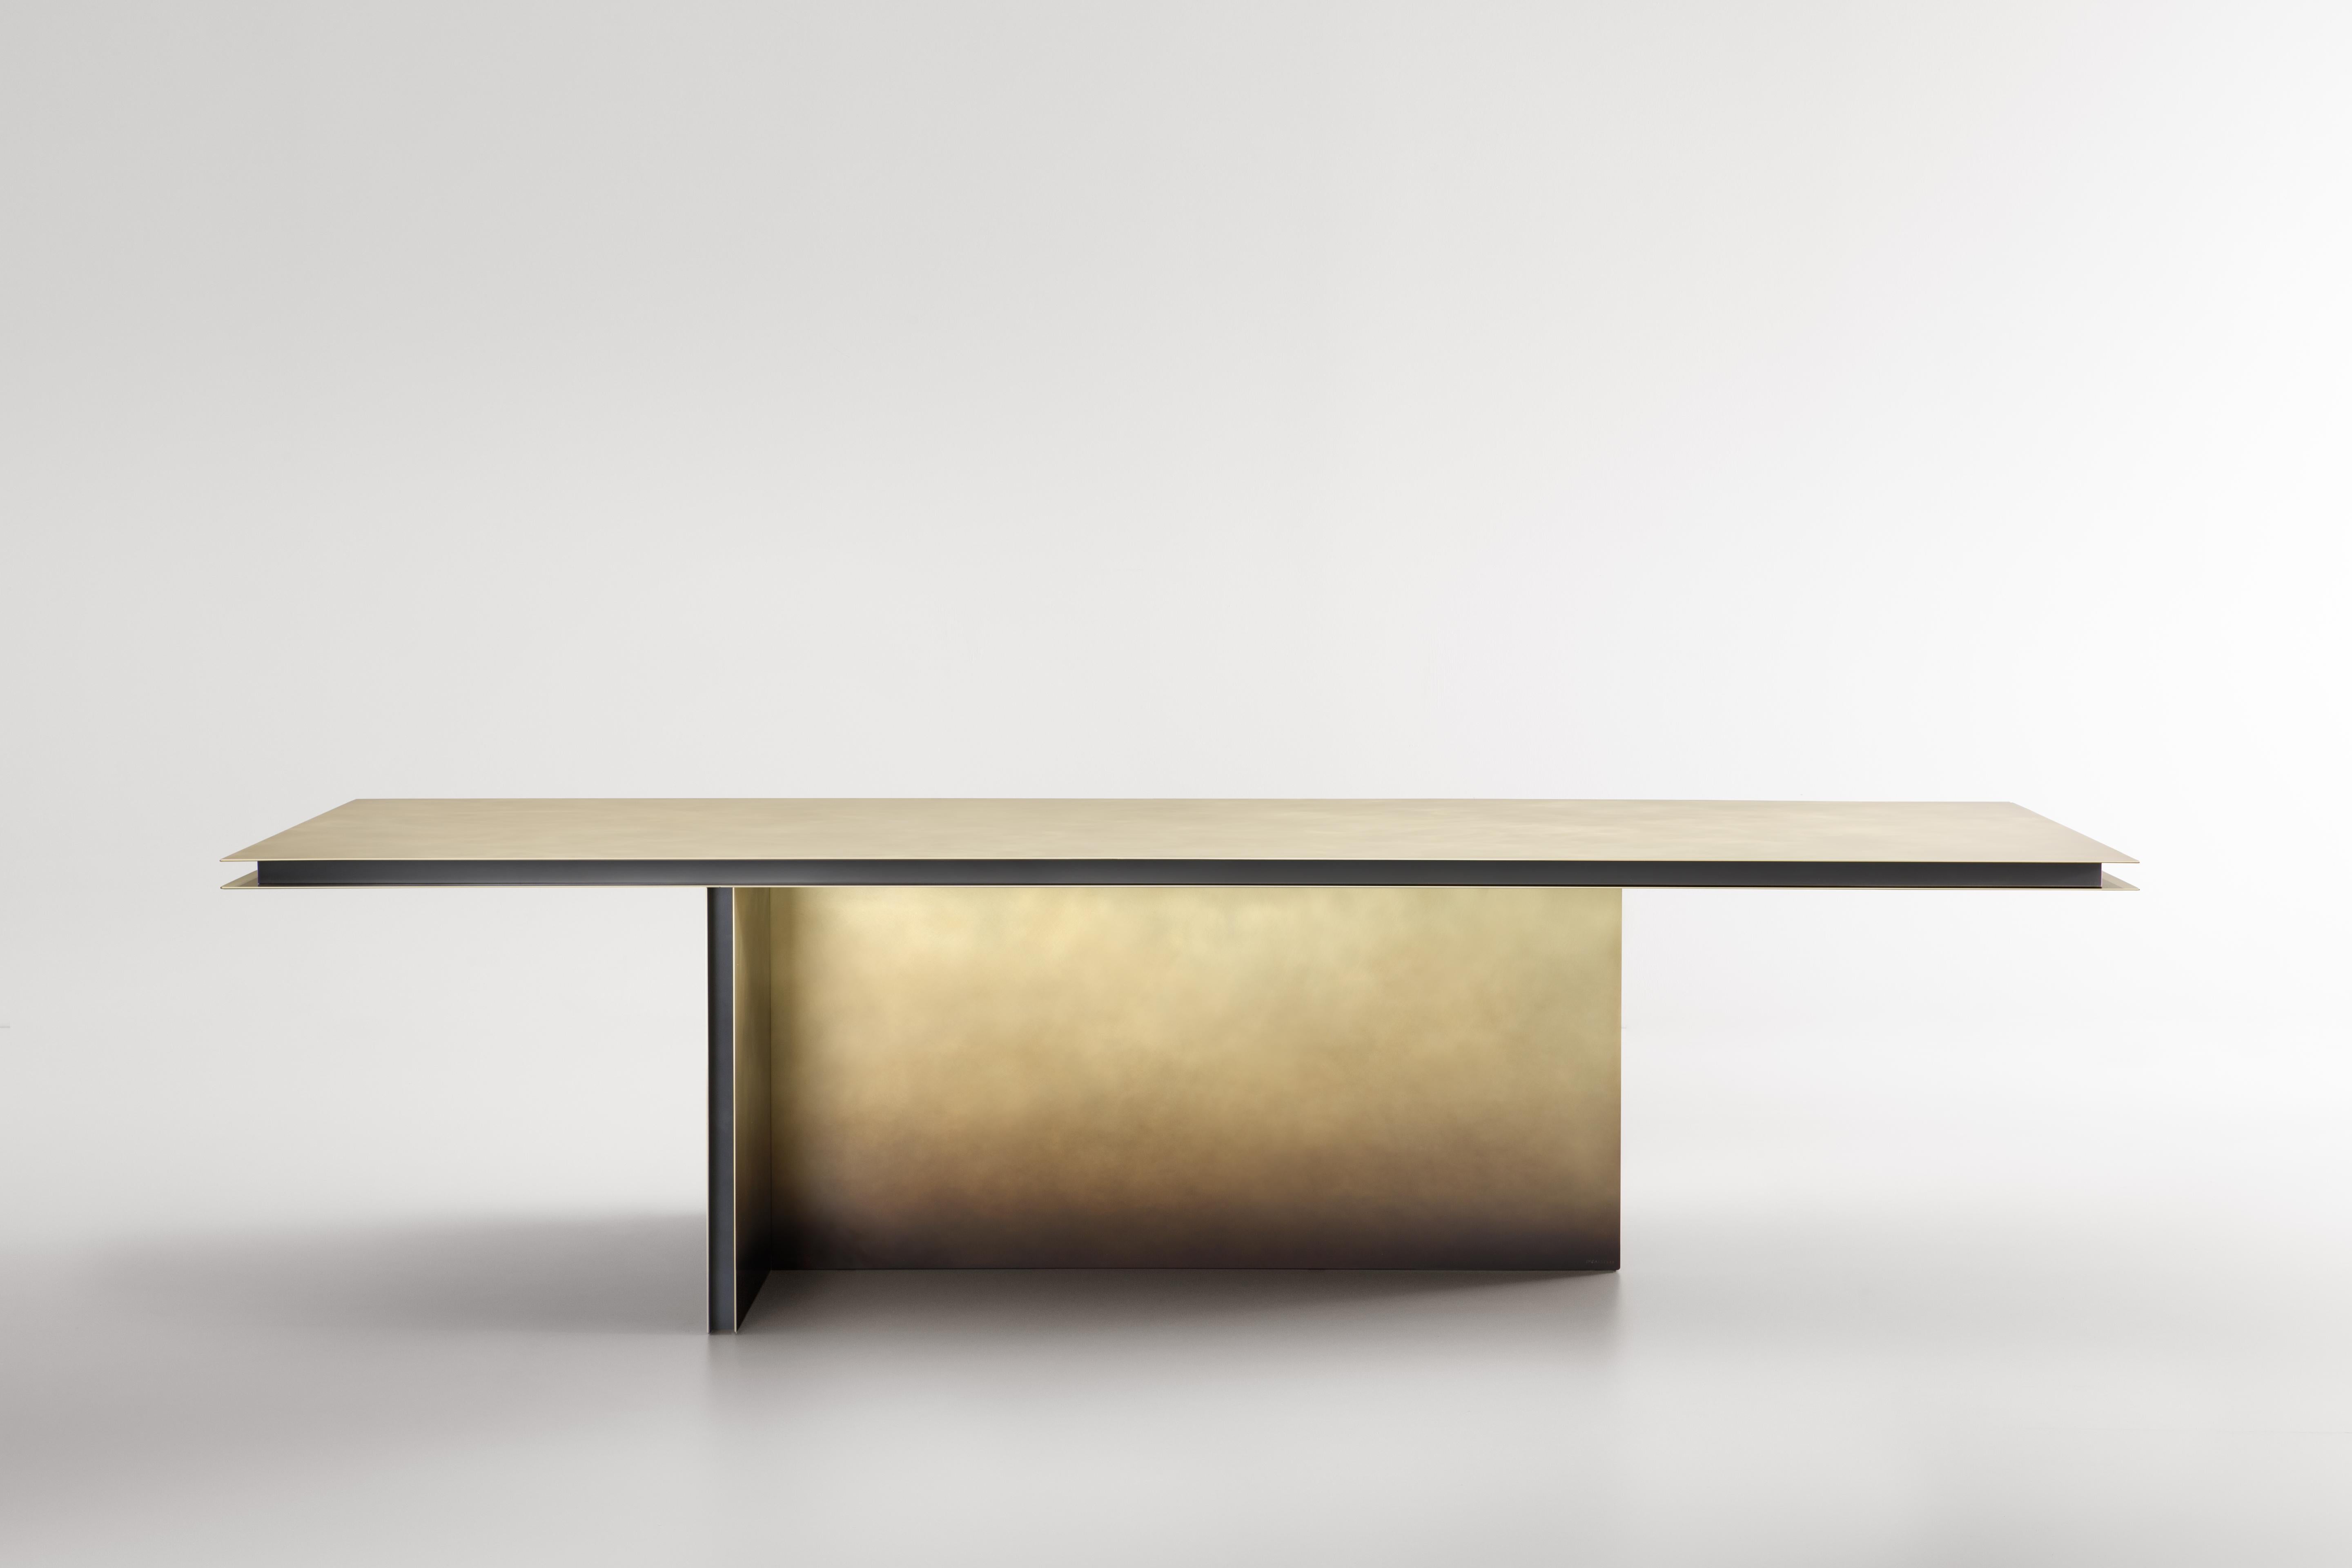 The Folio table is a pure, precise shape characterised by perpendicular planes of metal sheet. A rational sculpture that, thanks to the strength of its aesthetics, exalts the material in perfectly reflective surfaces.
A scenic presence, as simple